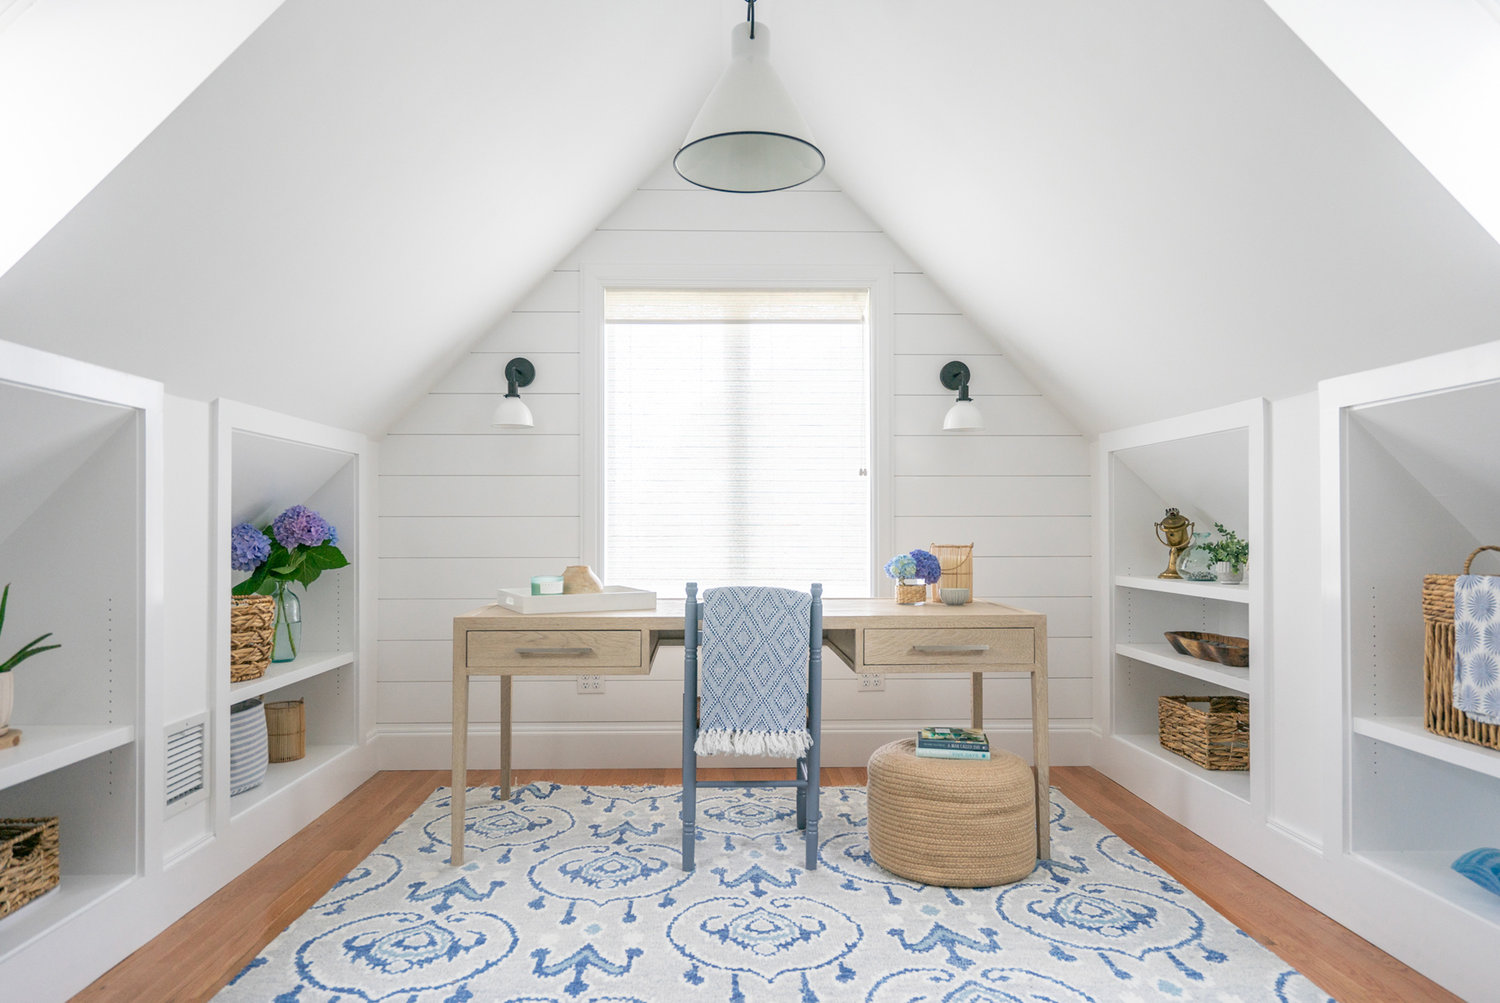 An attic is transformed into a fortress of solitude for working from home